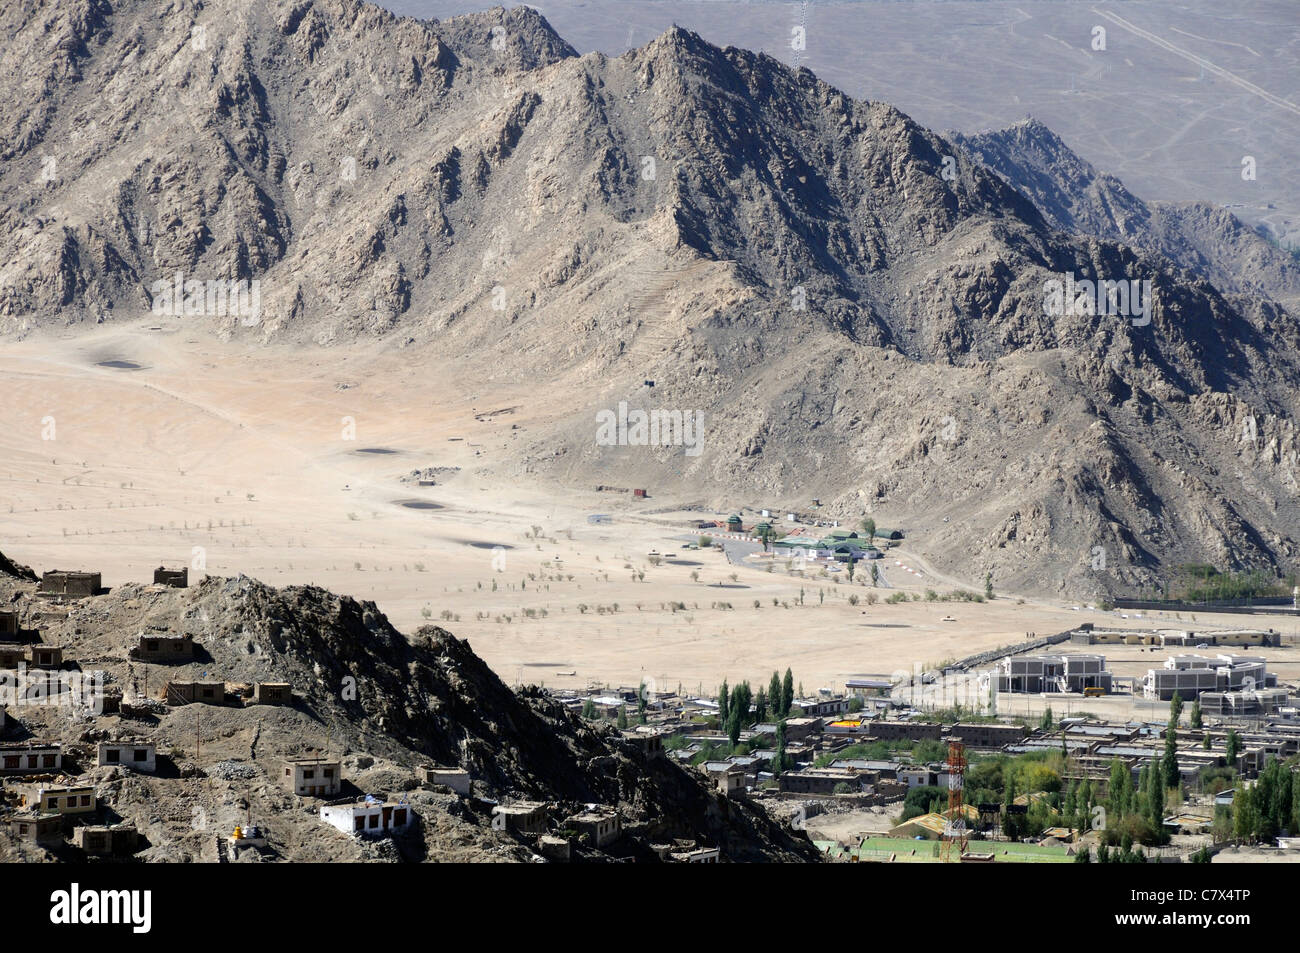 Leh's desert golf course at over 11,000 feet is the highest or second highest golf course in the world. Stock Photo